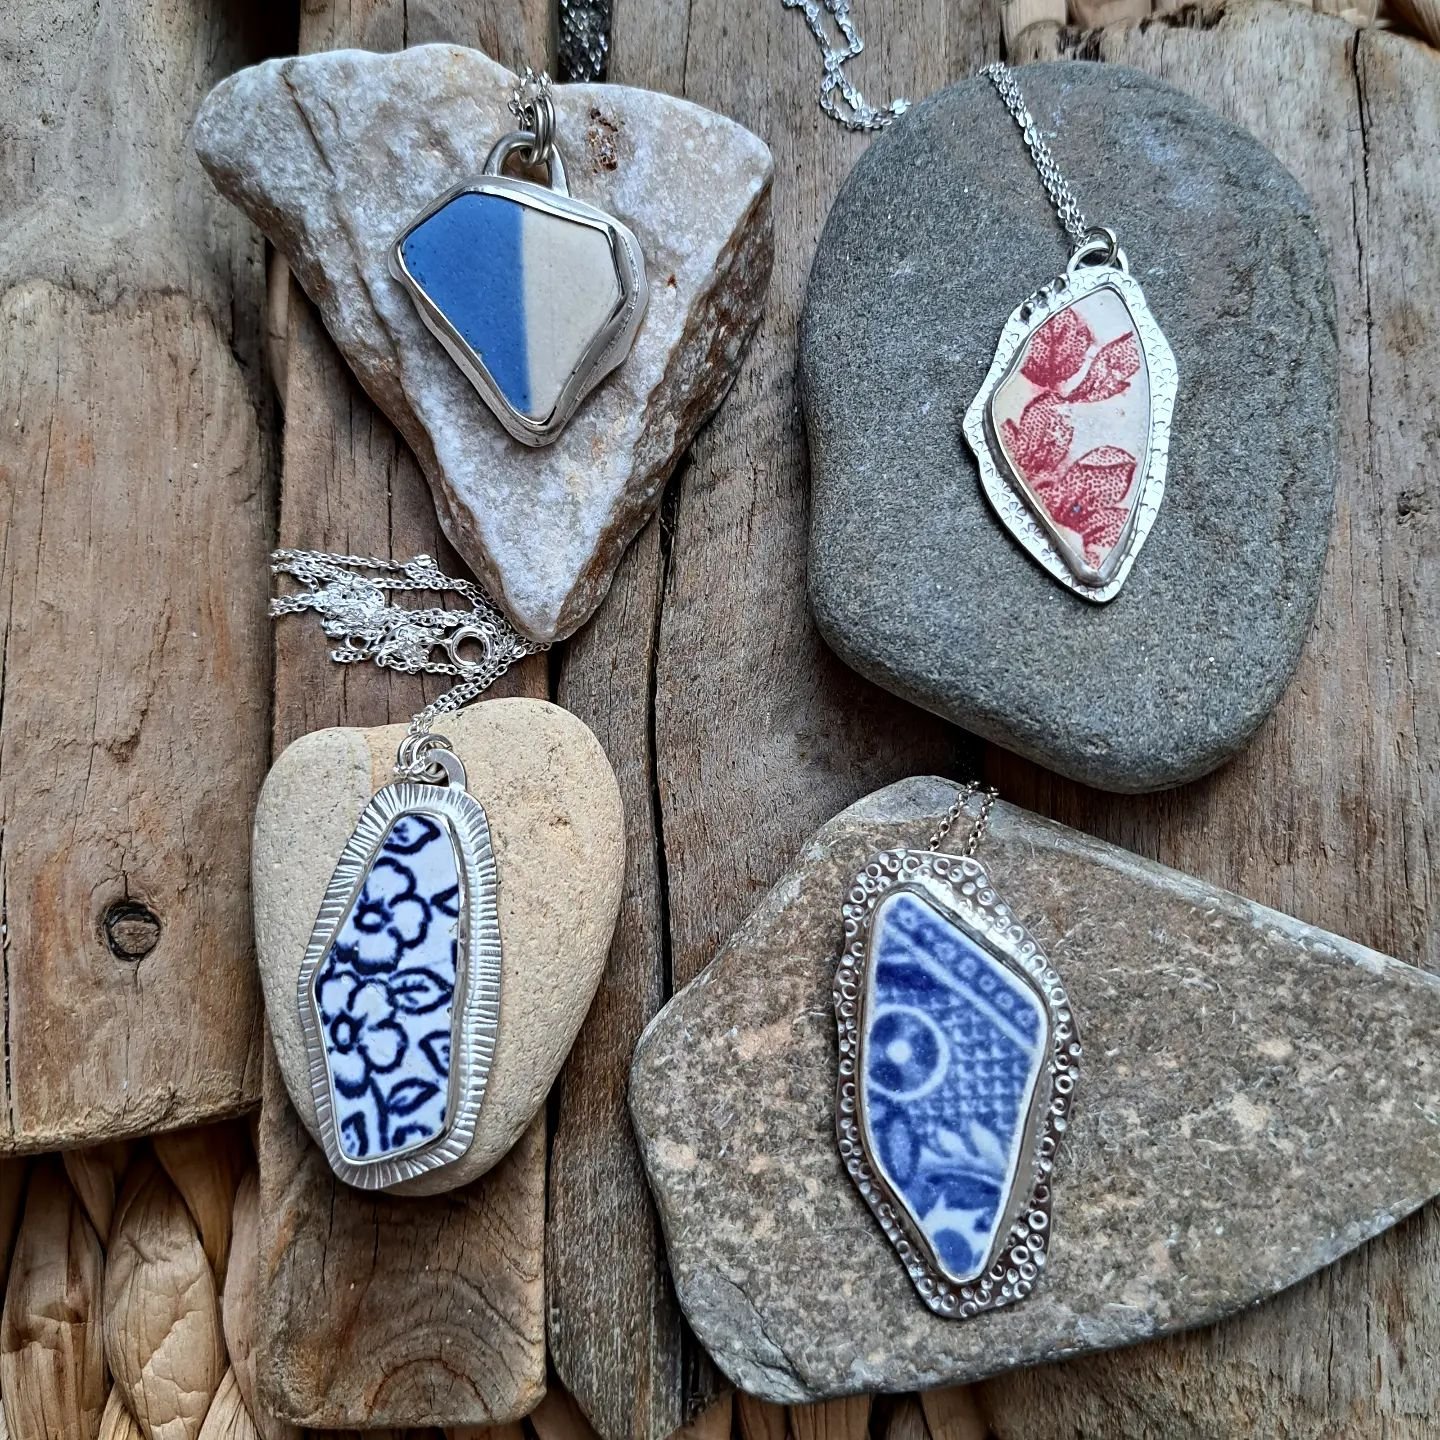 Four pendants using sea pottery, which has been shaped and tumbled by the ocean 🌊 Each one has a beautiful pattern from the original piece of pottery it came from, serendipitously chosen by the ocean as it sees fit ❤️

I'm busy working on commission